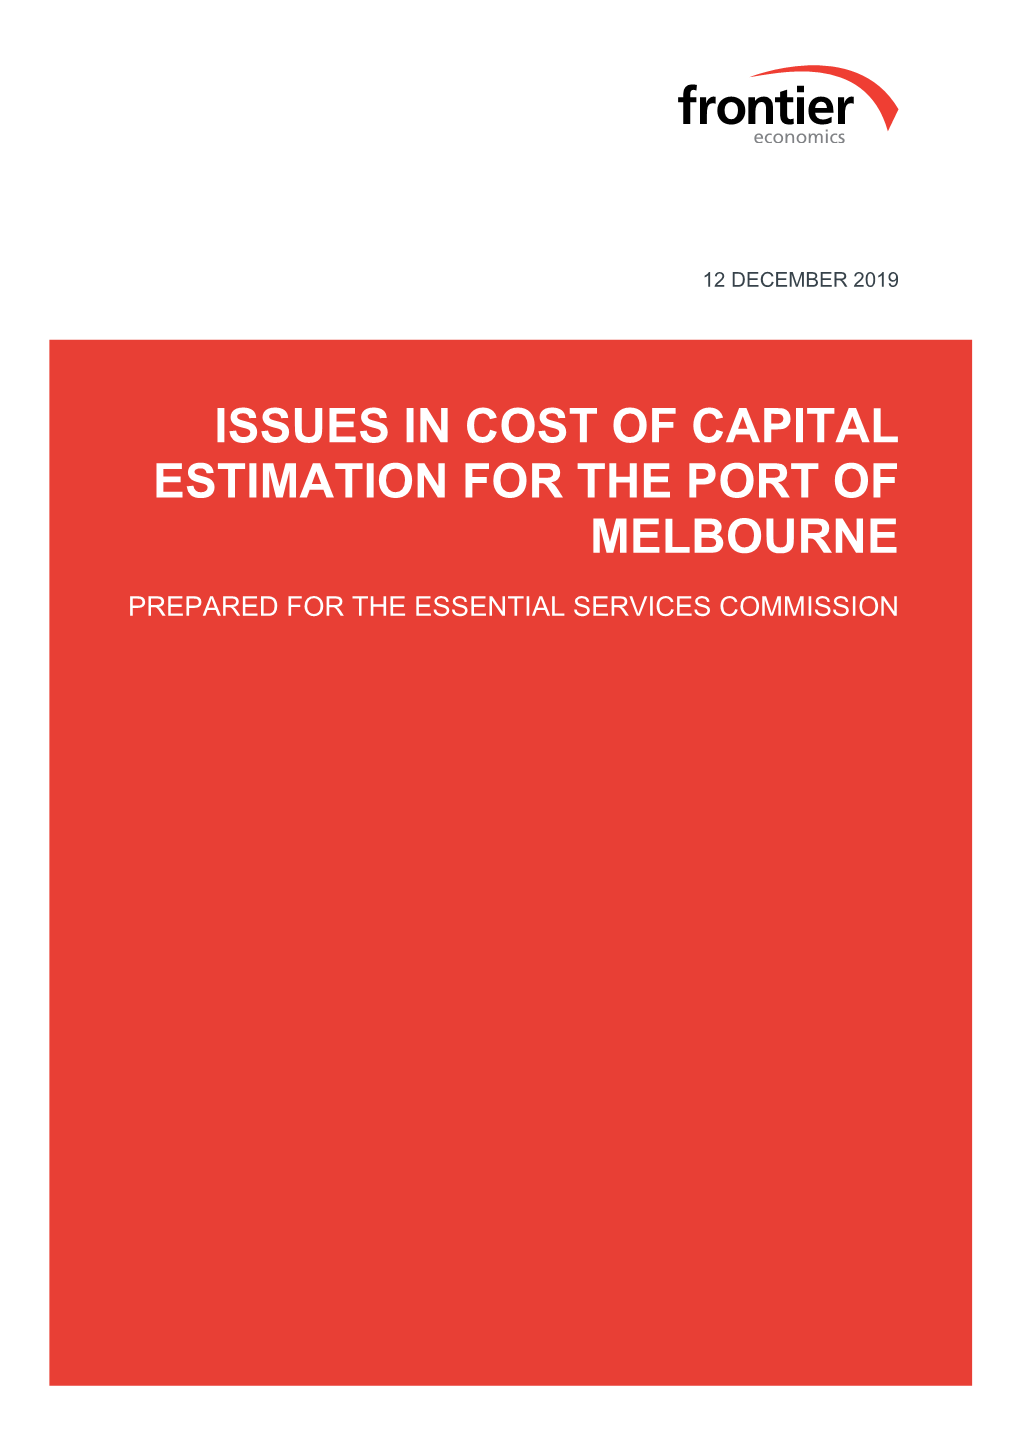 Issues in Cost of Capital Estimation for the Port of Melbourne